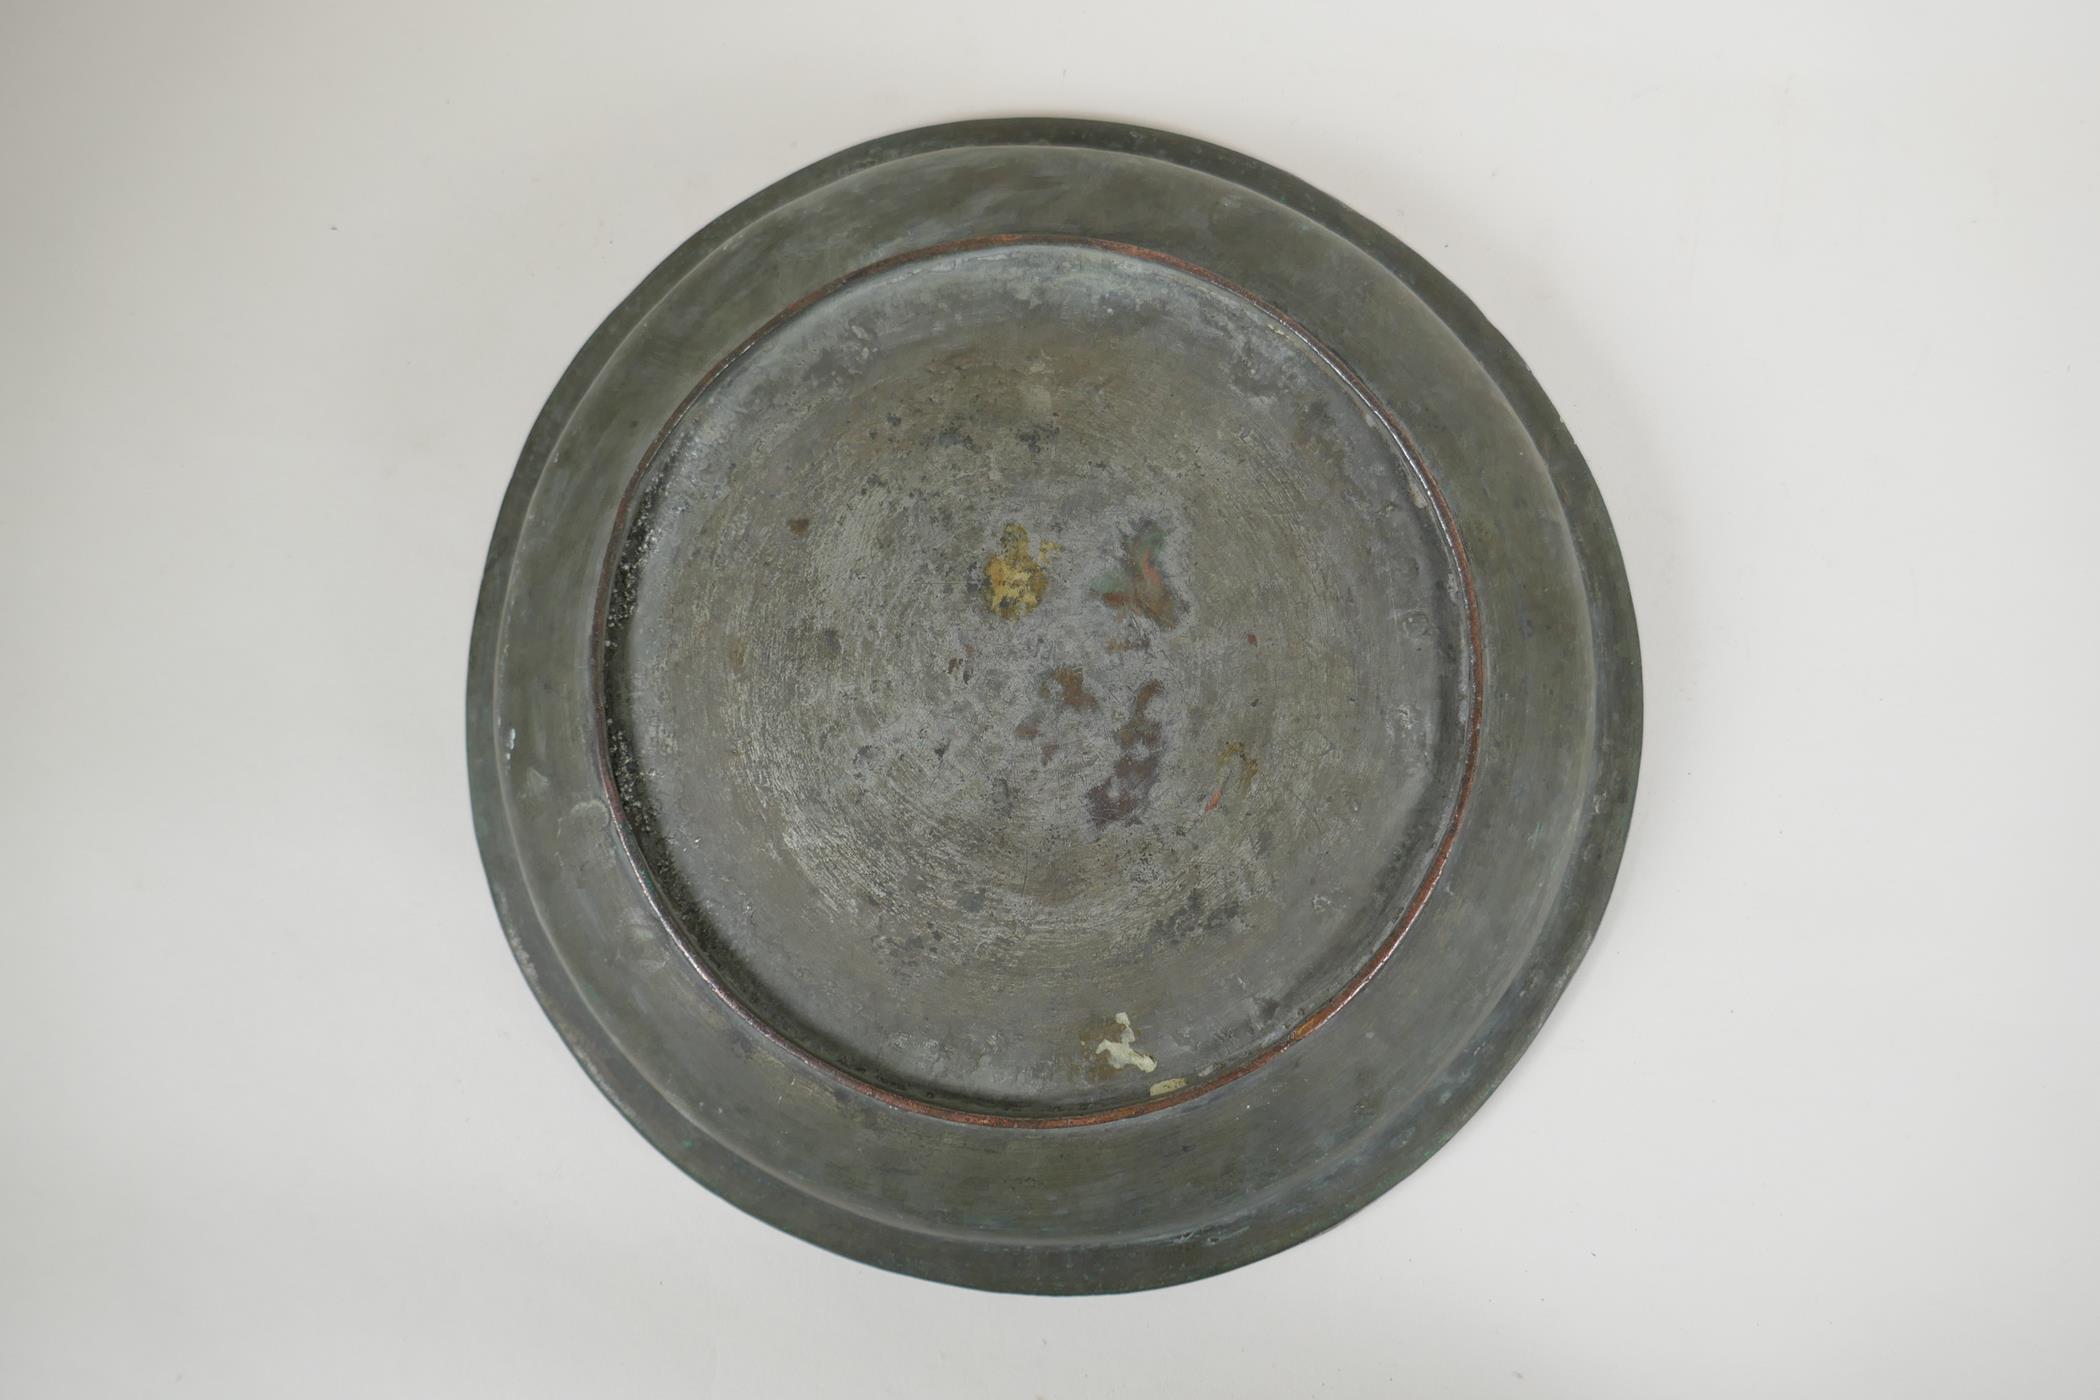 An antique Islamic copper dish with chased script and floral decoration, 34cm diameter - Image 3 of 3